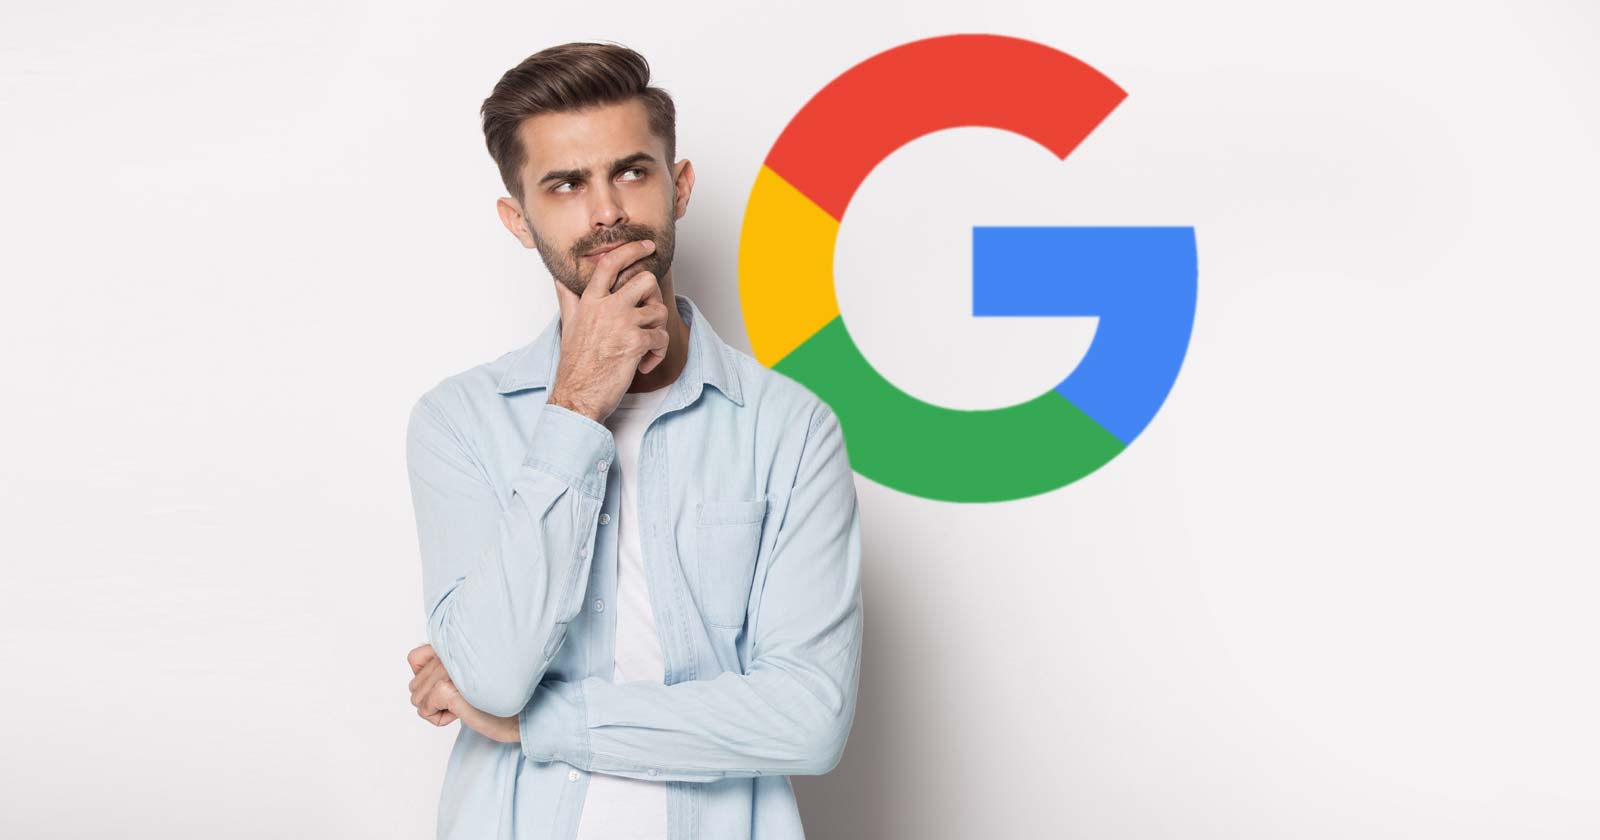 Image of a man looking with skepticism at at Google's logo